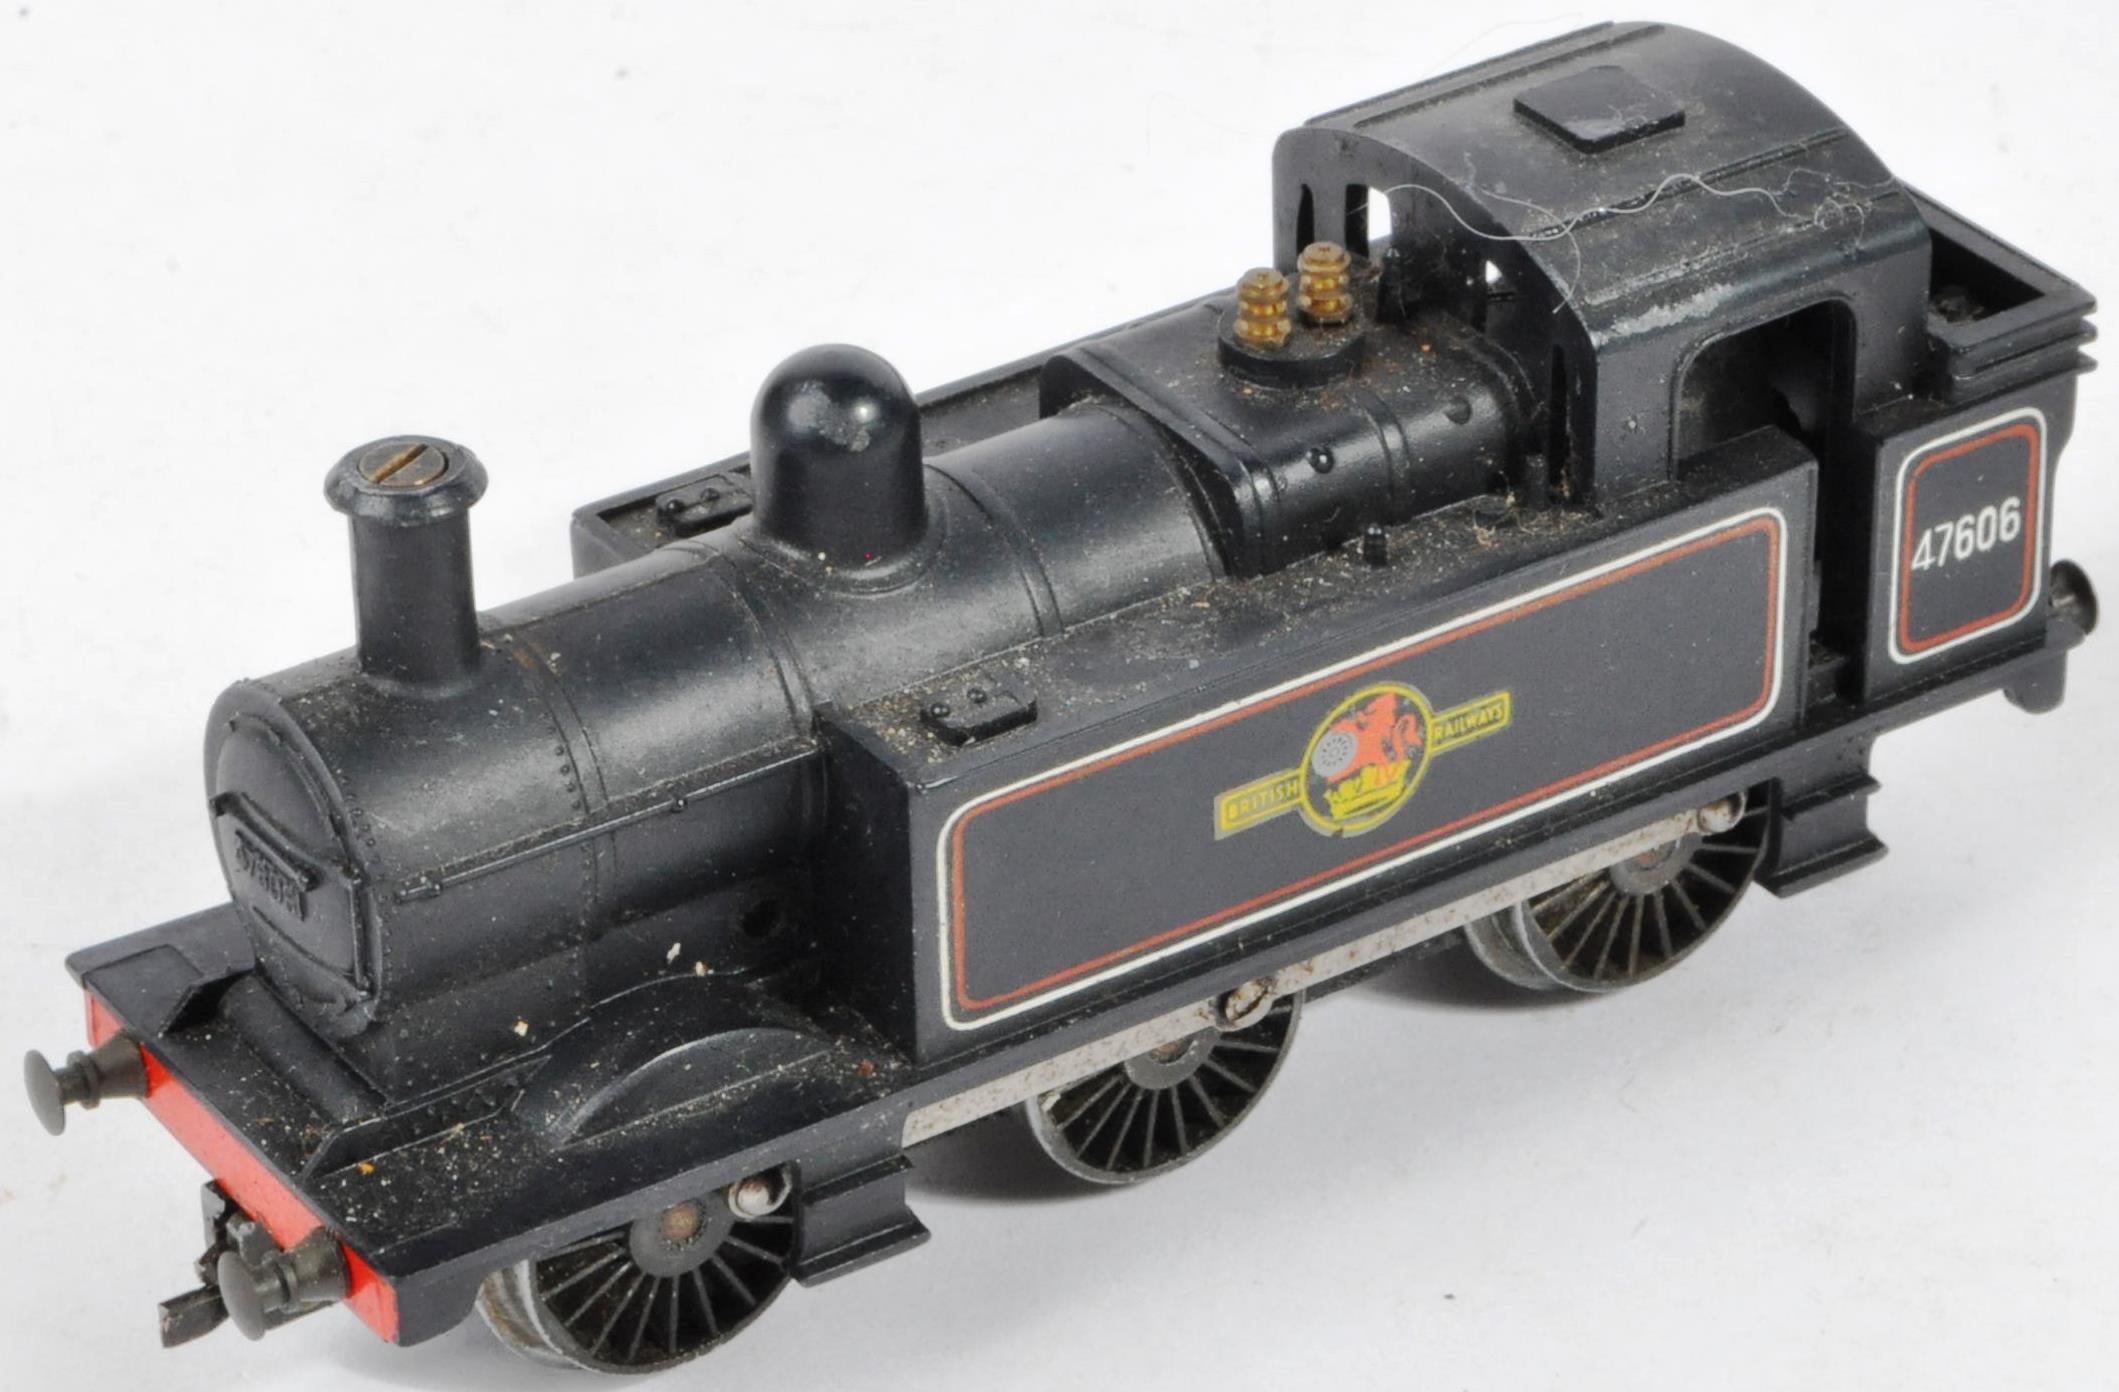 COLLECTION OF HORNBY / TRIANG TRAIN SET LOCOMOTIVE ENGINES - Image 4 of 8